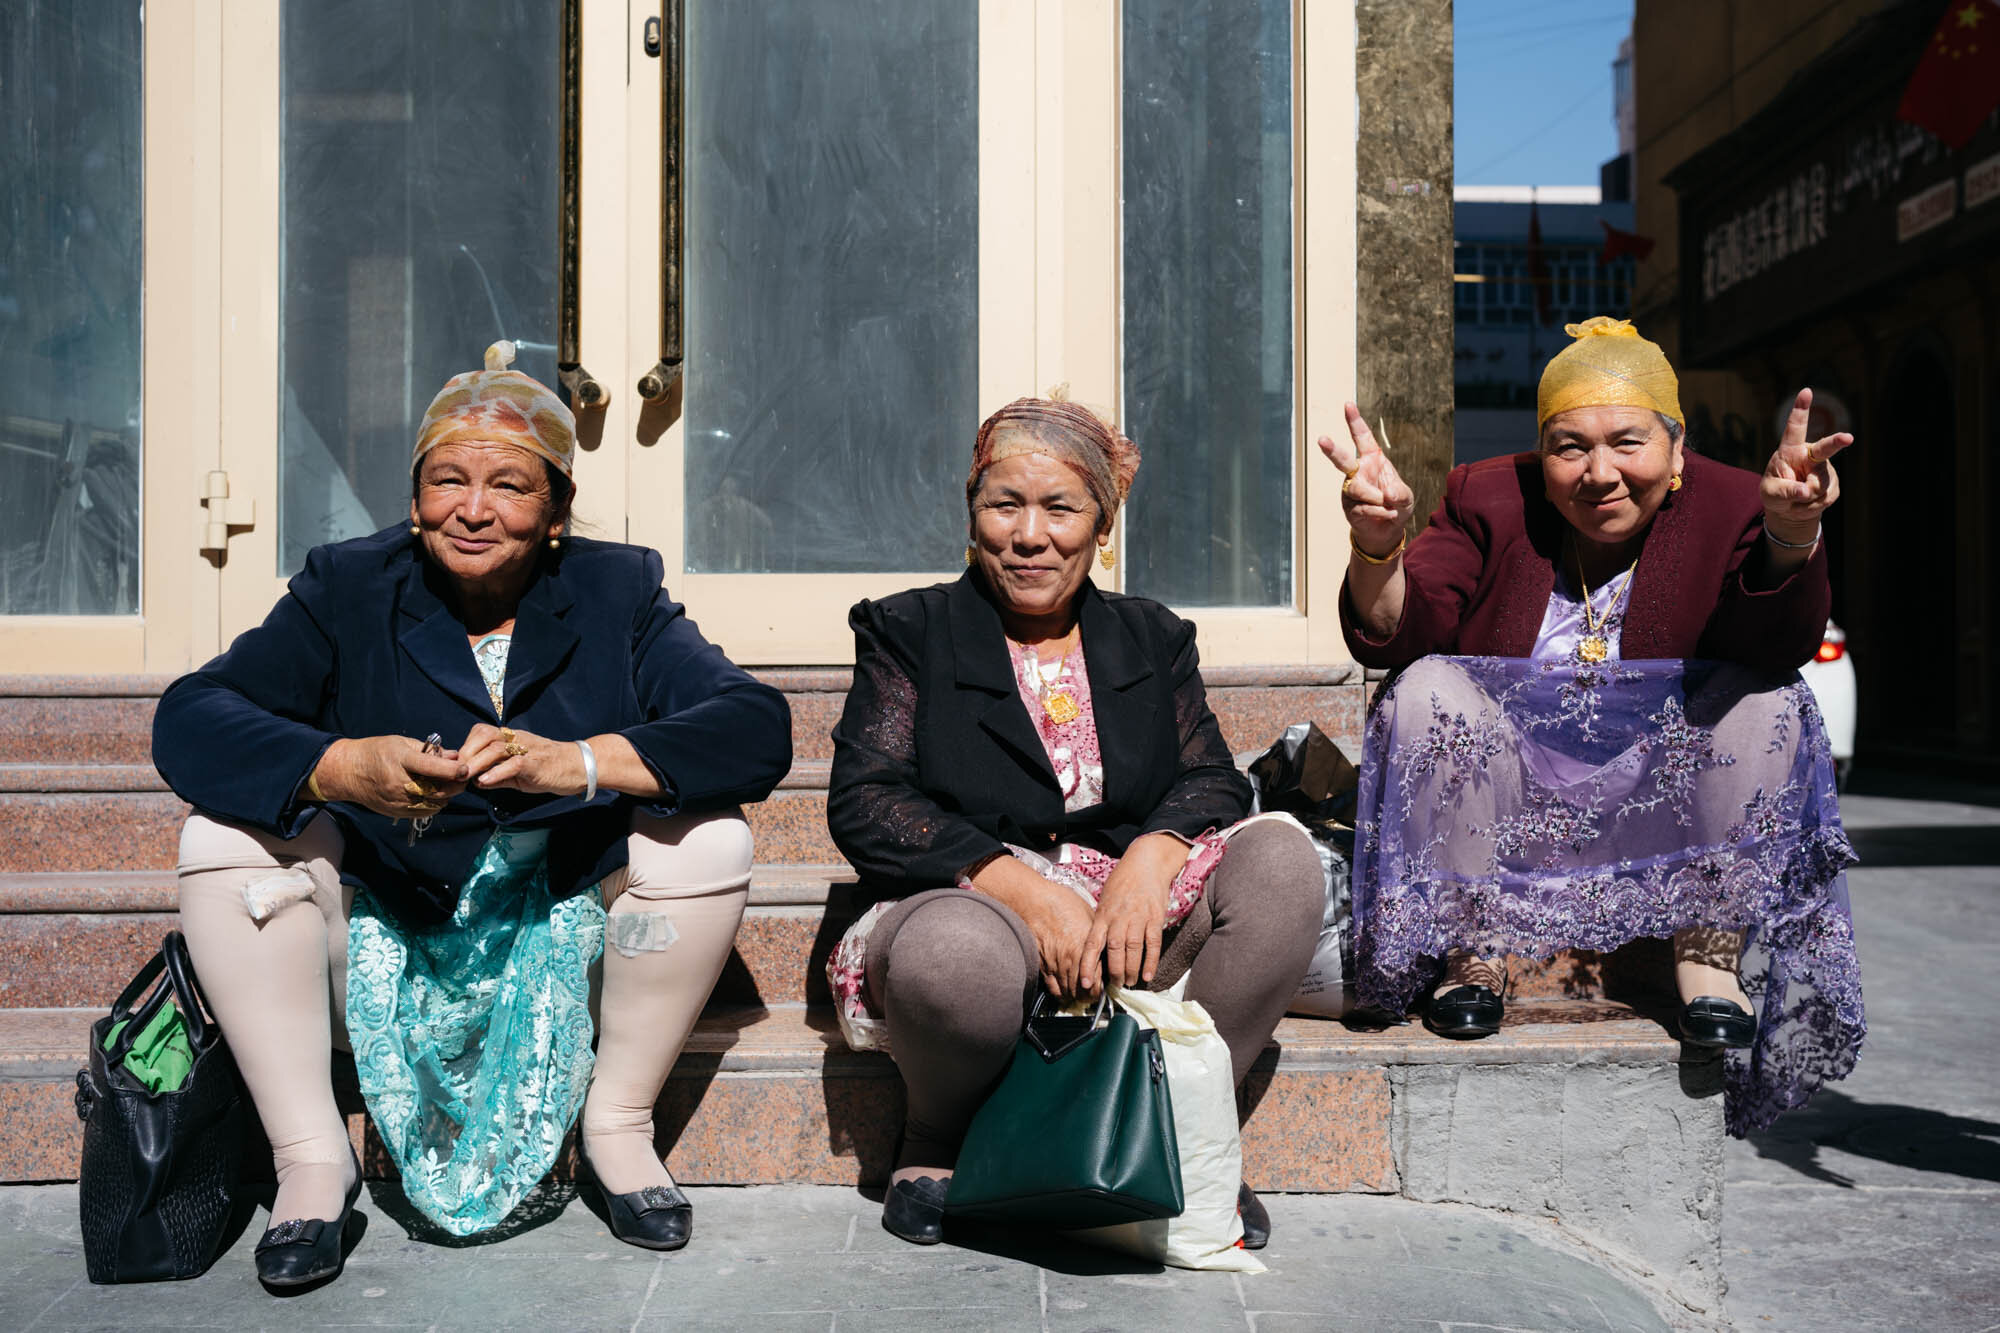  Three Uyghur ladies. The Uyghurs are a Turkic minority ethnic group originating from and culturally affiliated with the general region of Central and East Asia. The Uyghurs are recognised as native to the Xinjiang Uyghur Autonomous Region in Northwe